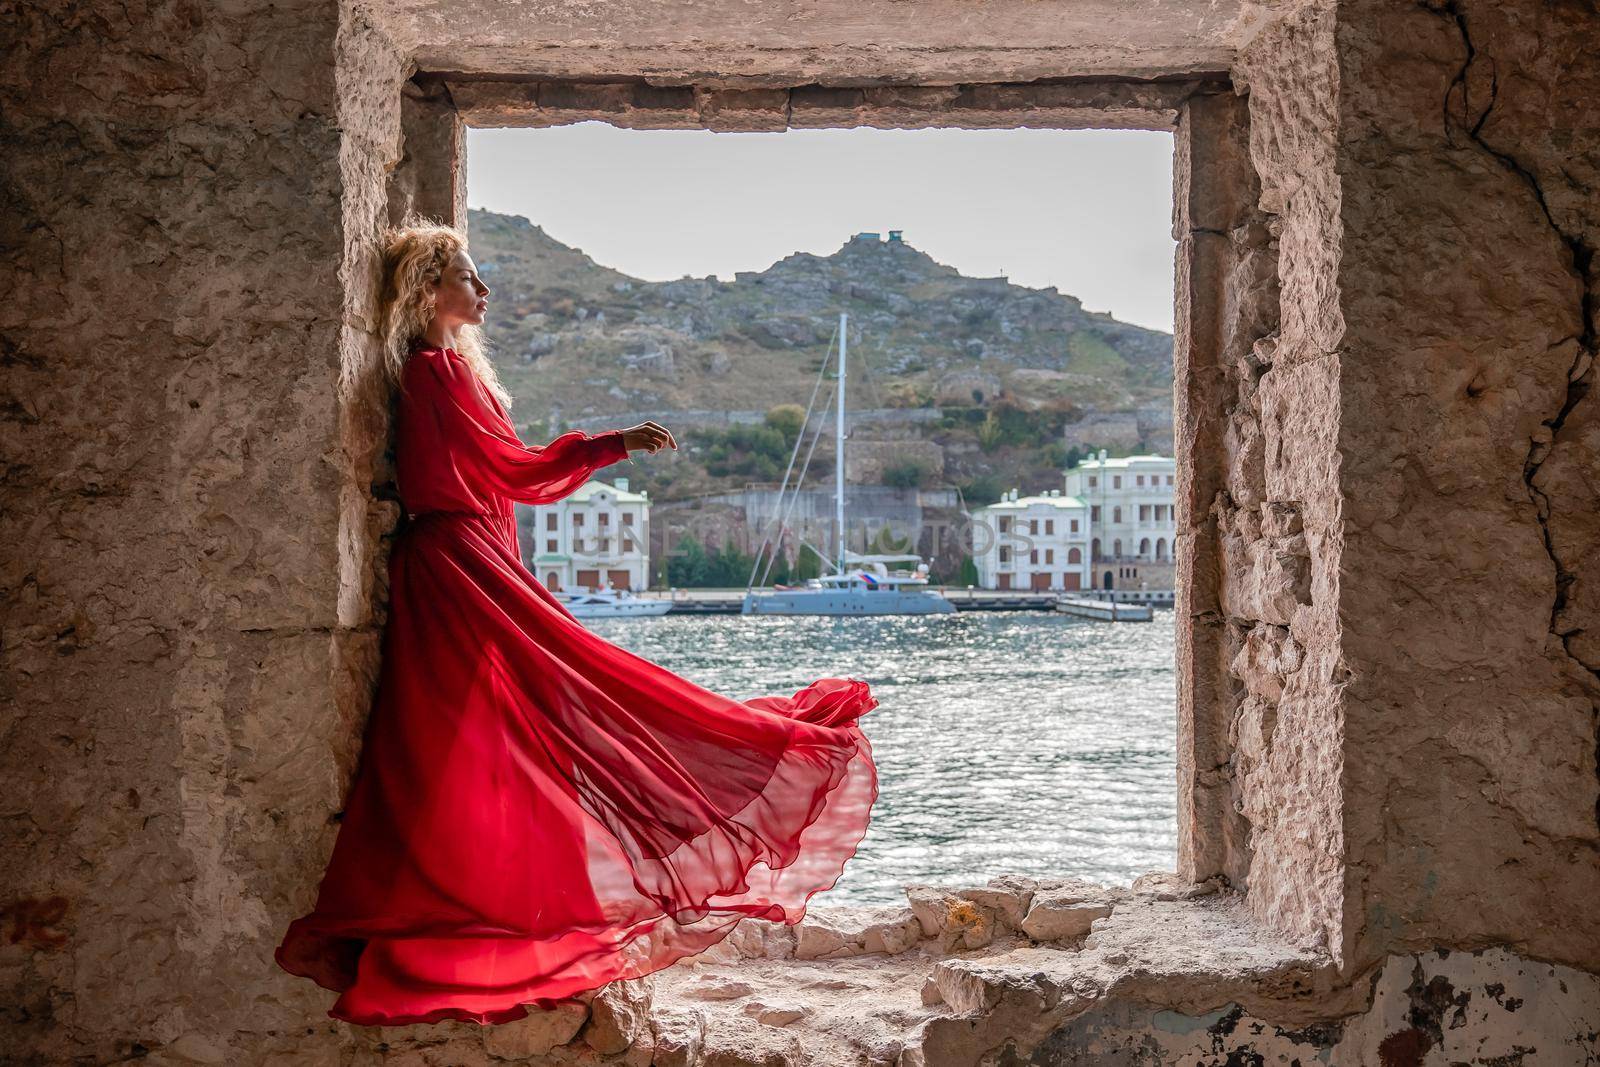 View of Balaklava Bay through an arched balcony in oriental style. The girl in a long red dress stands with her back. Abandoned mansion on the Black Sea coast.